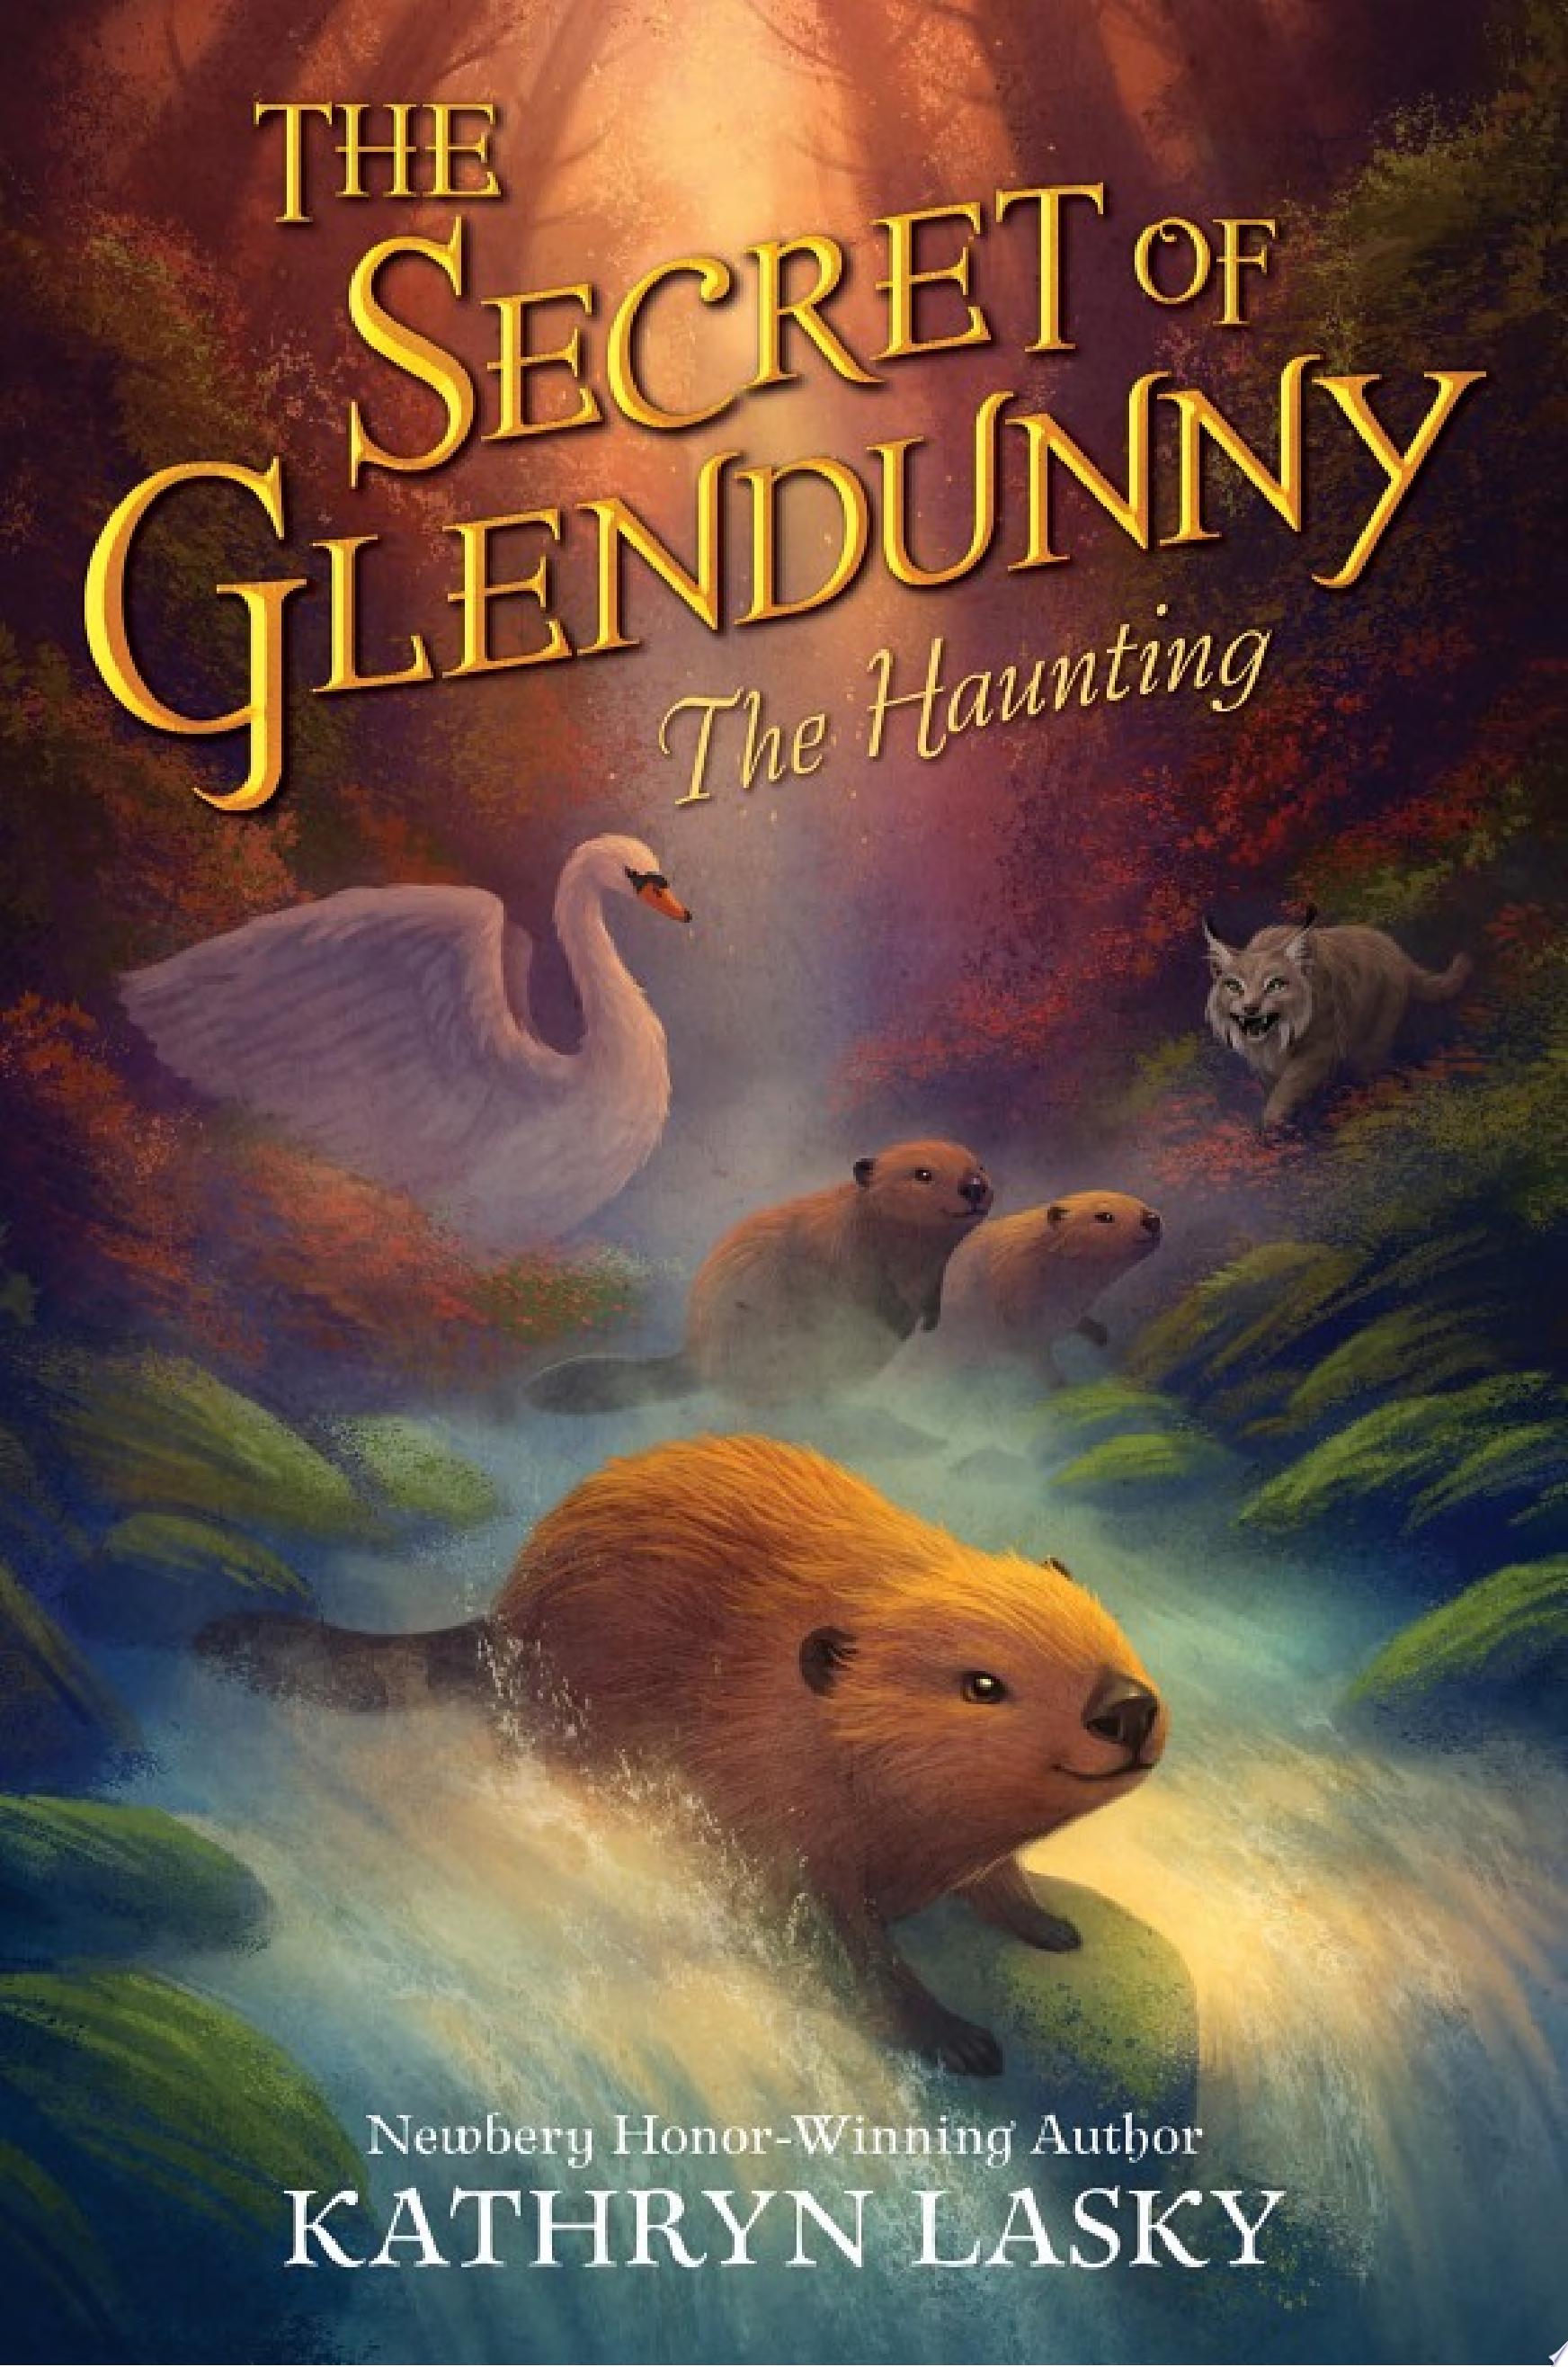 Image for "The Secret of Glendunny: The Haunting"